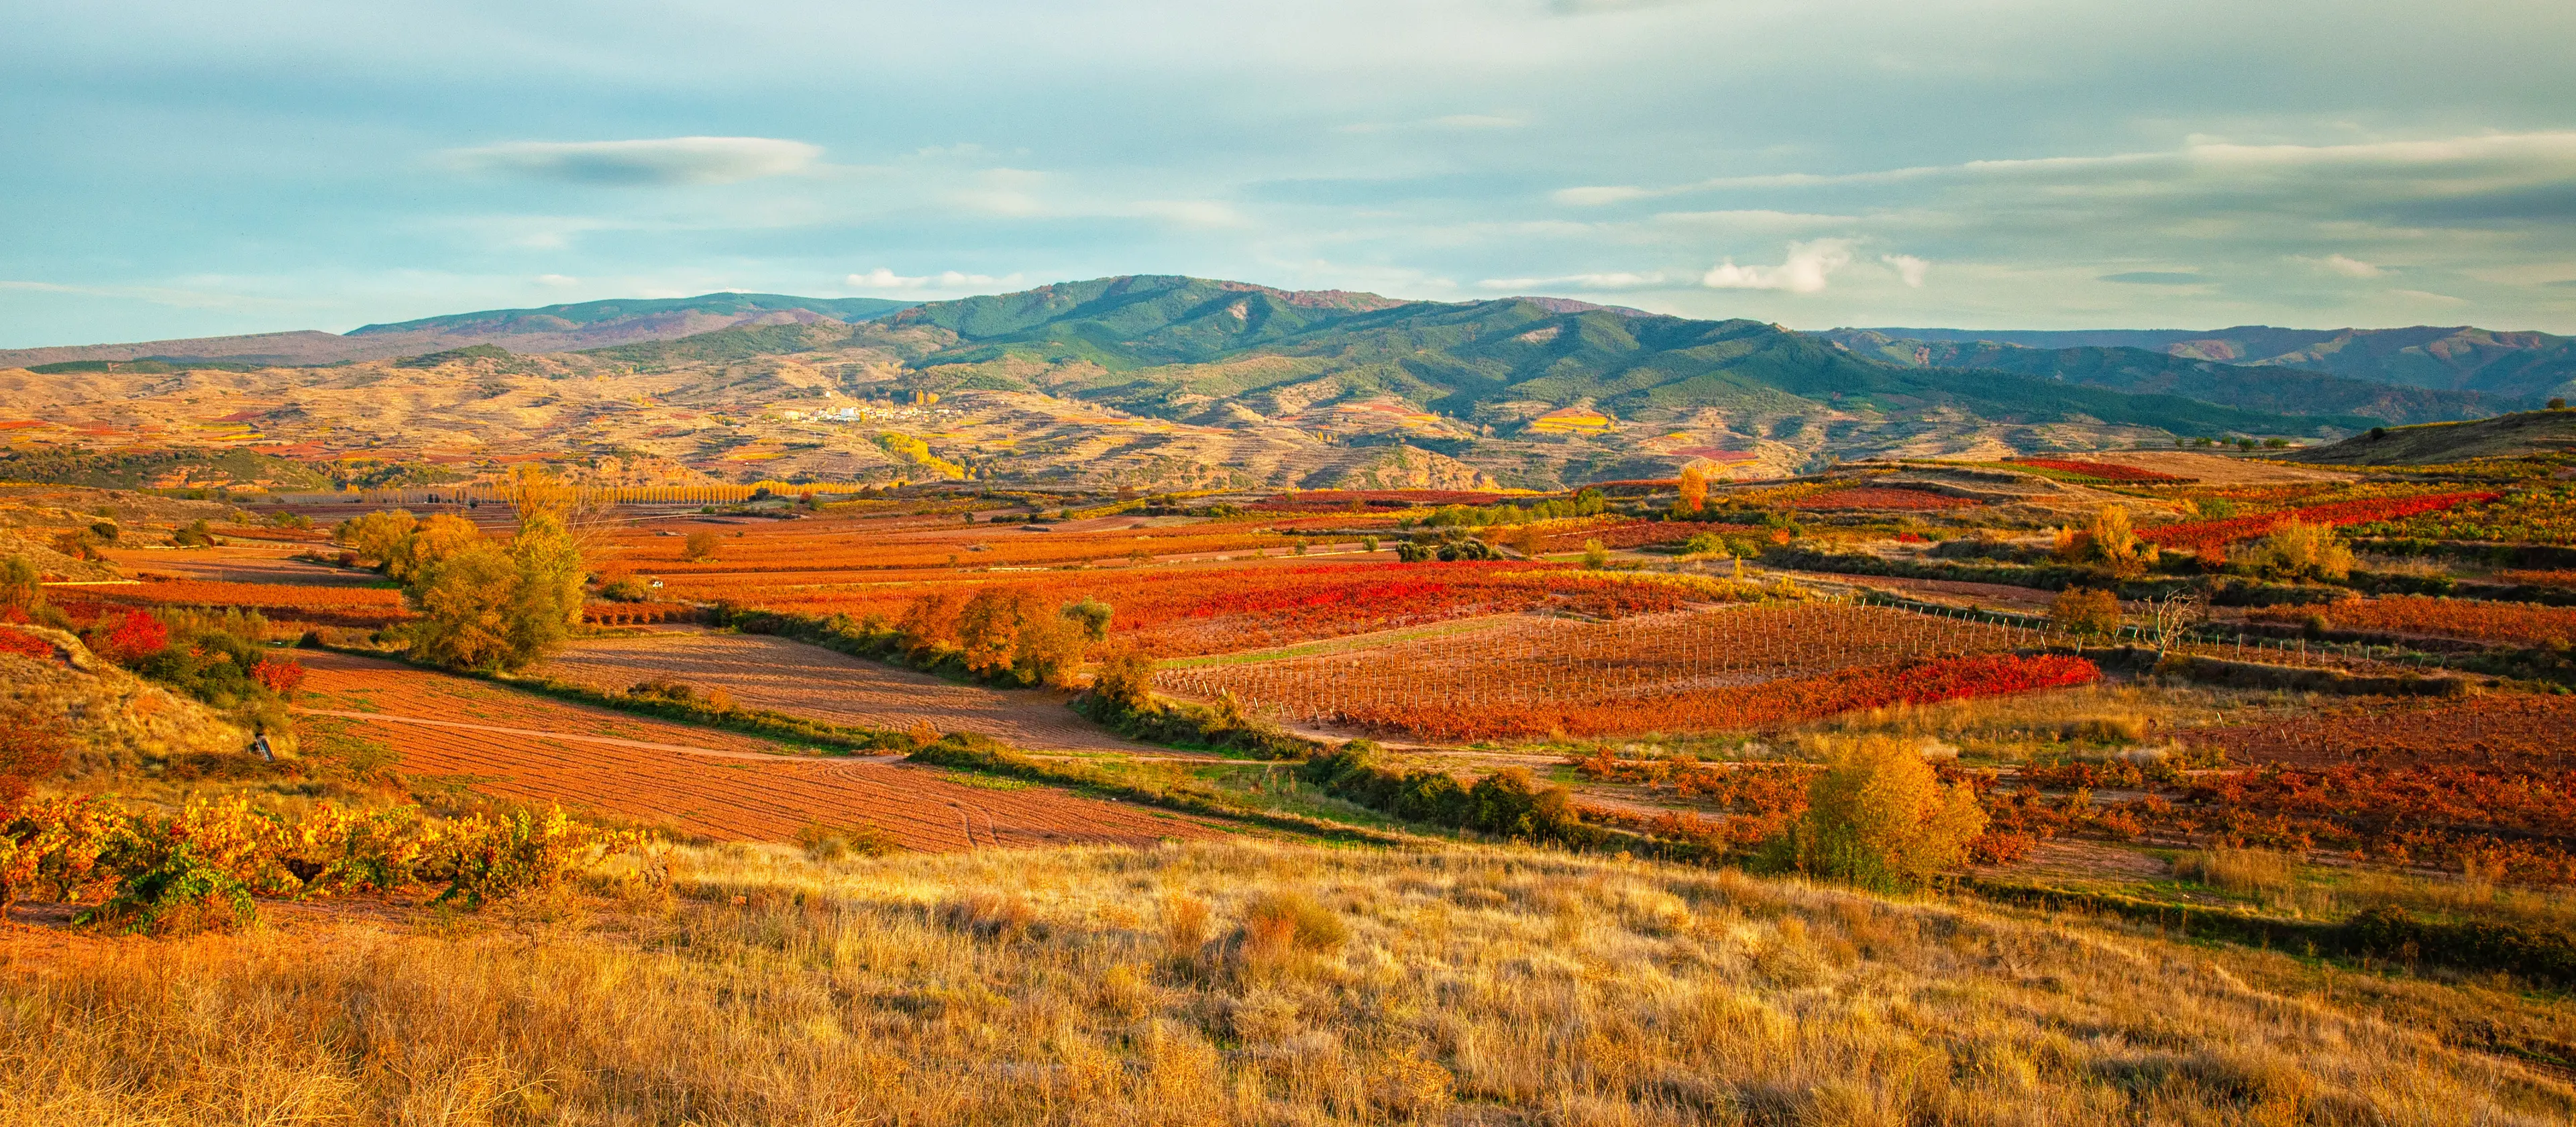 2-Day Local Experience in Rioja: Wine, Food, and Nightlife with Friends